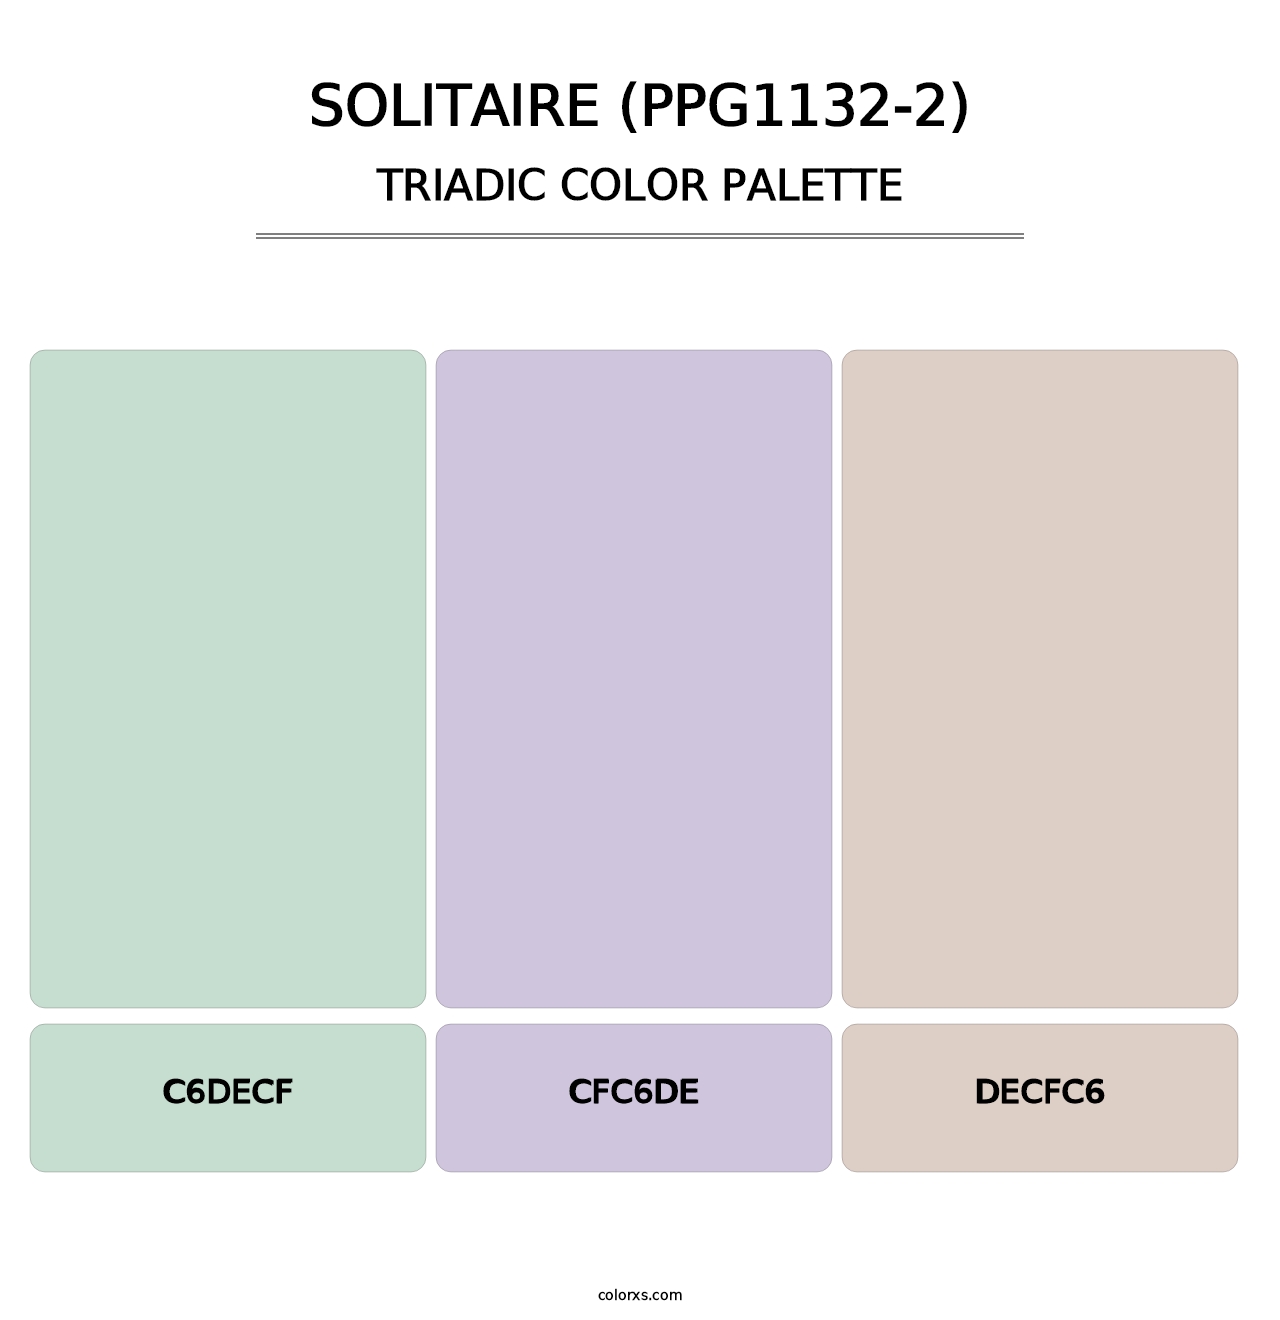 Solitaire (PPG1132-2) - Triadic Color Palette